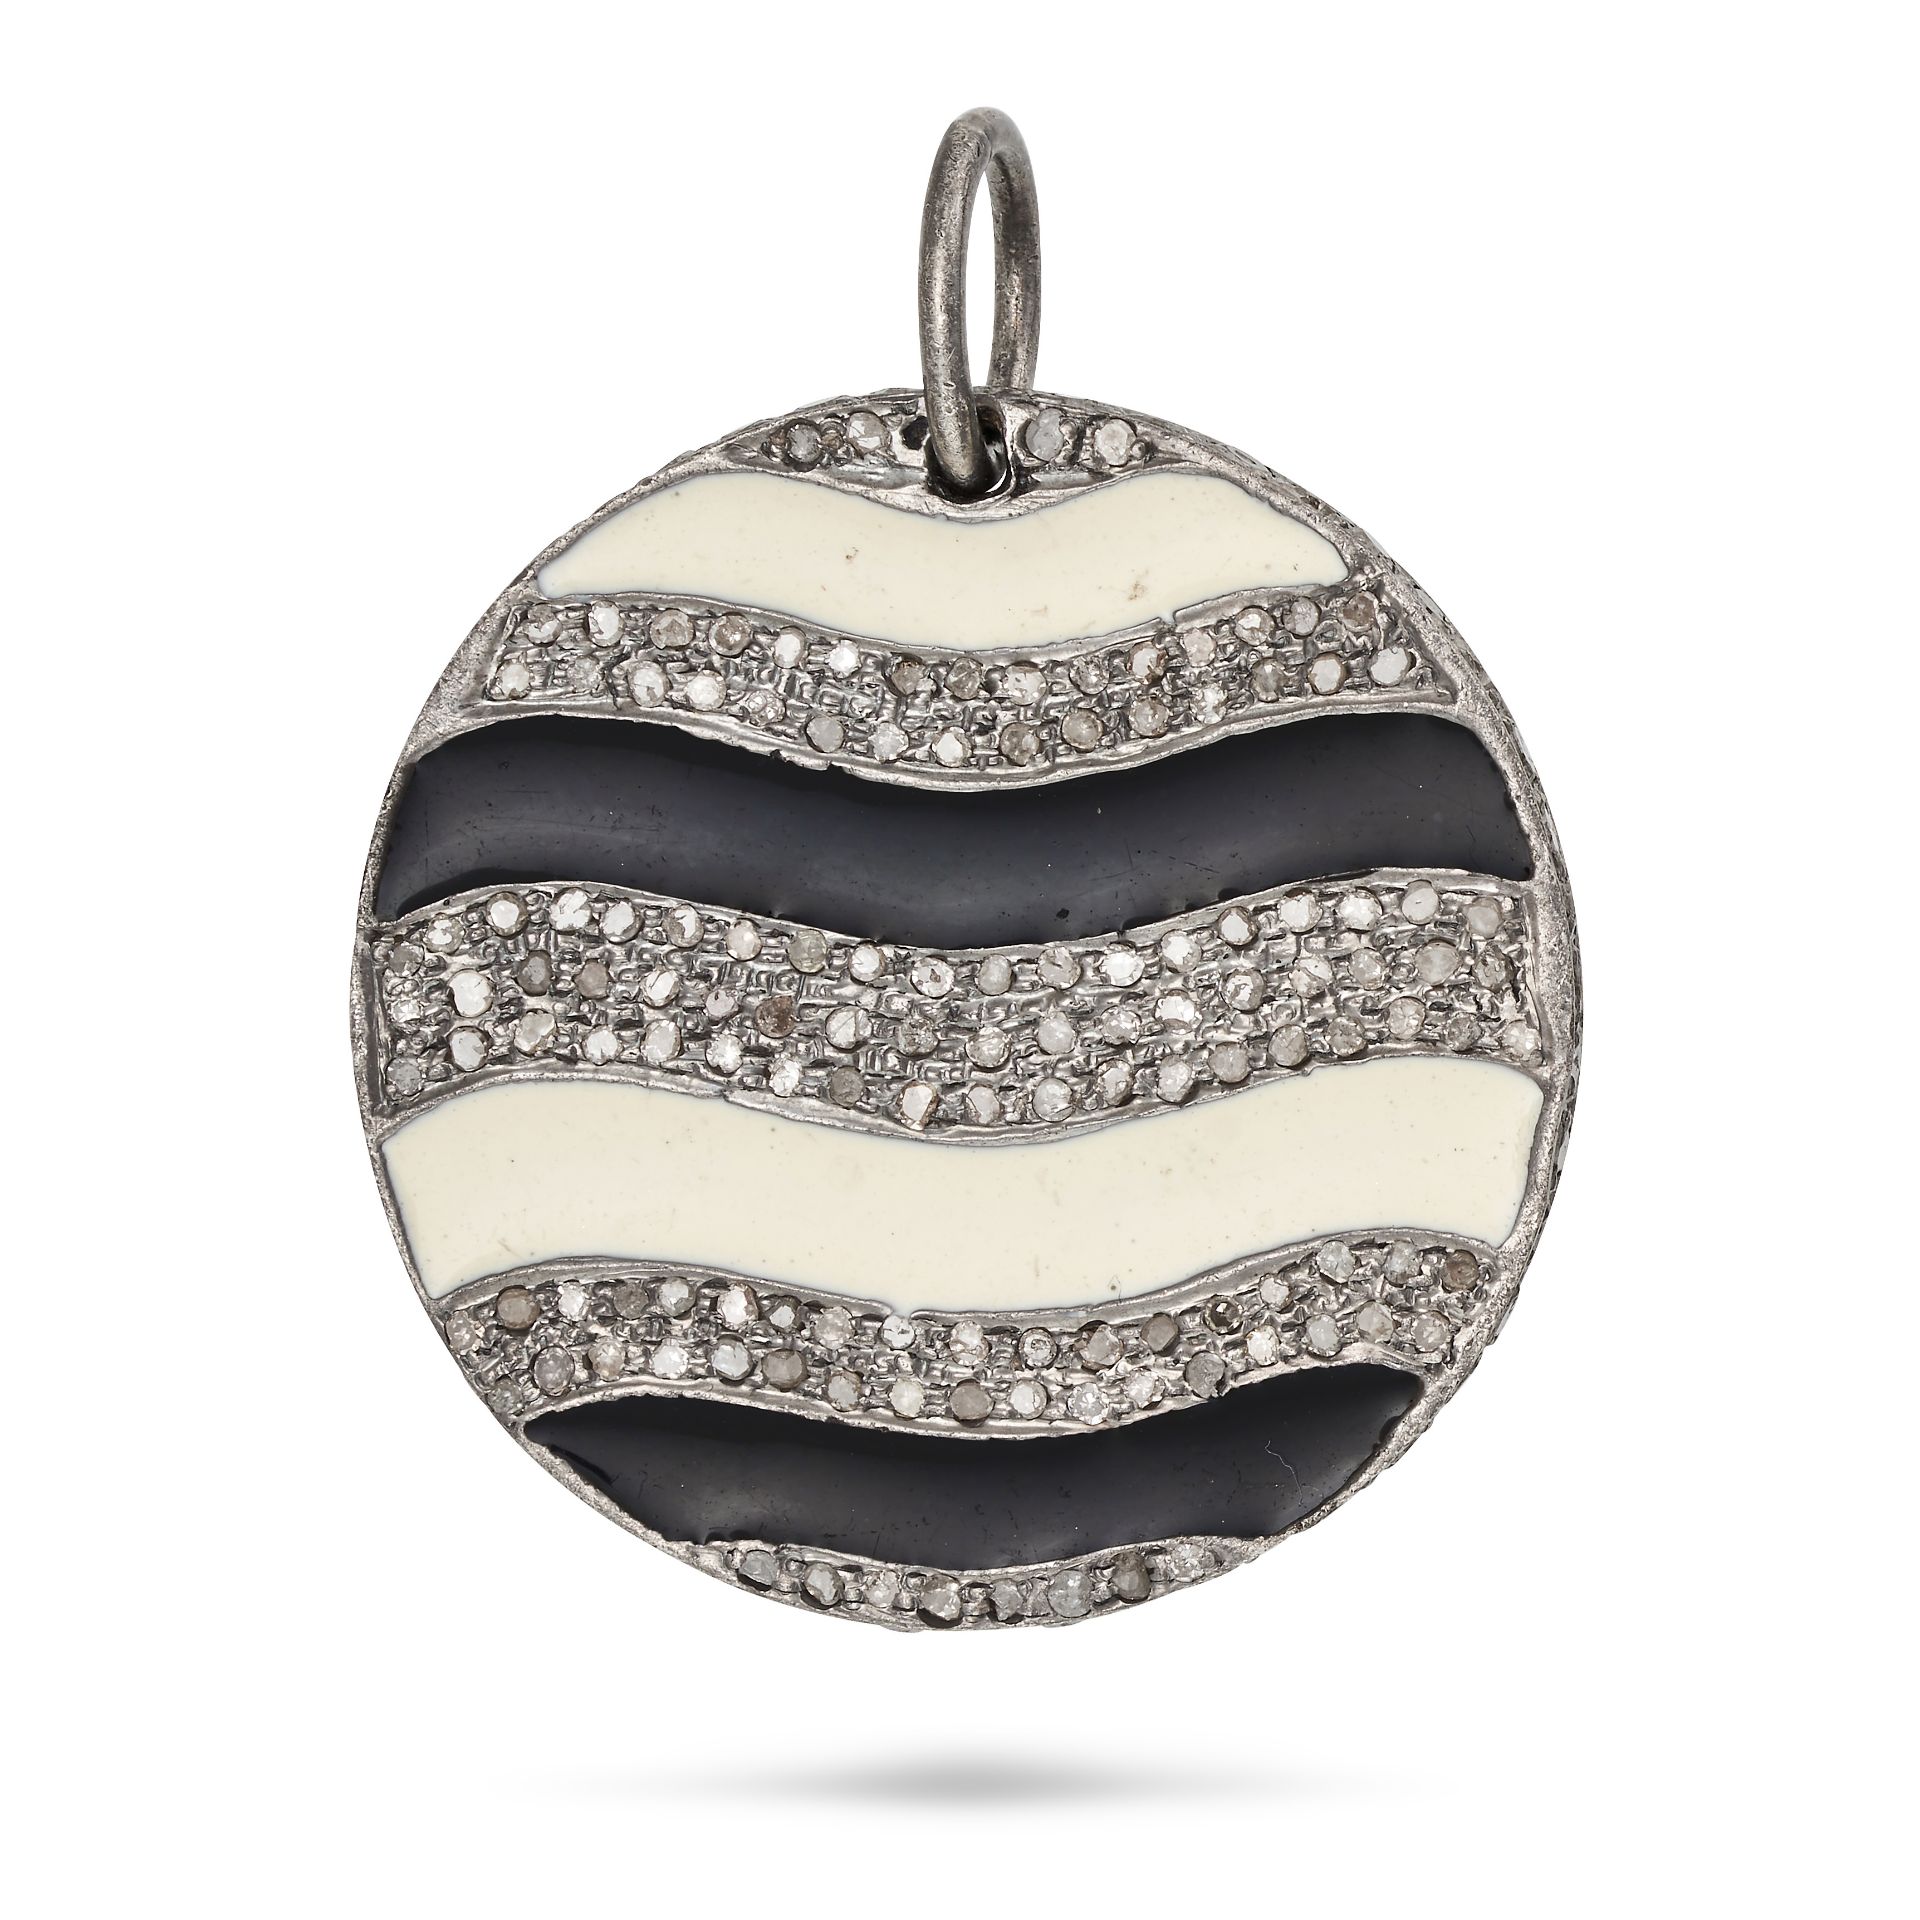 NO RESERVE - A DIAMOND AND ENAMEL PENDANT the circular pendant decorated with black and white ena...